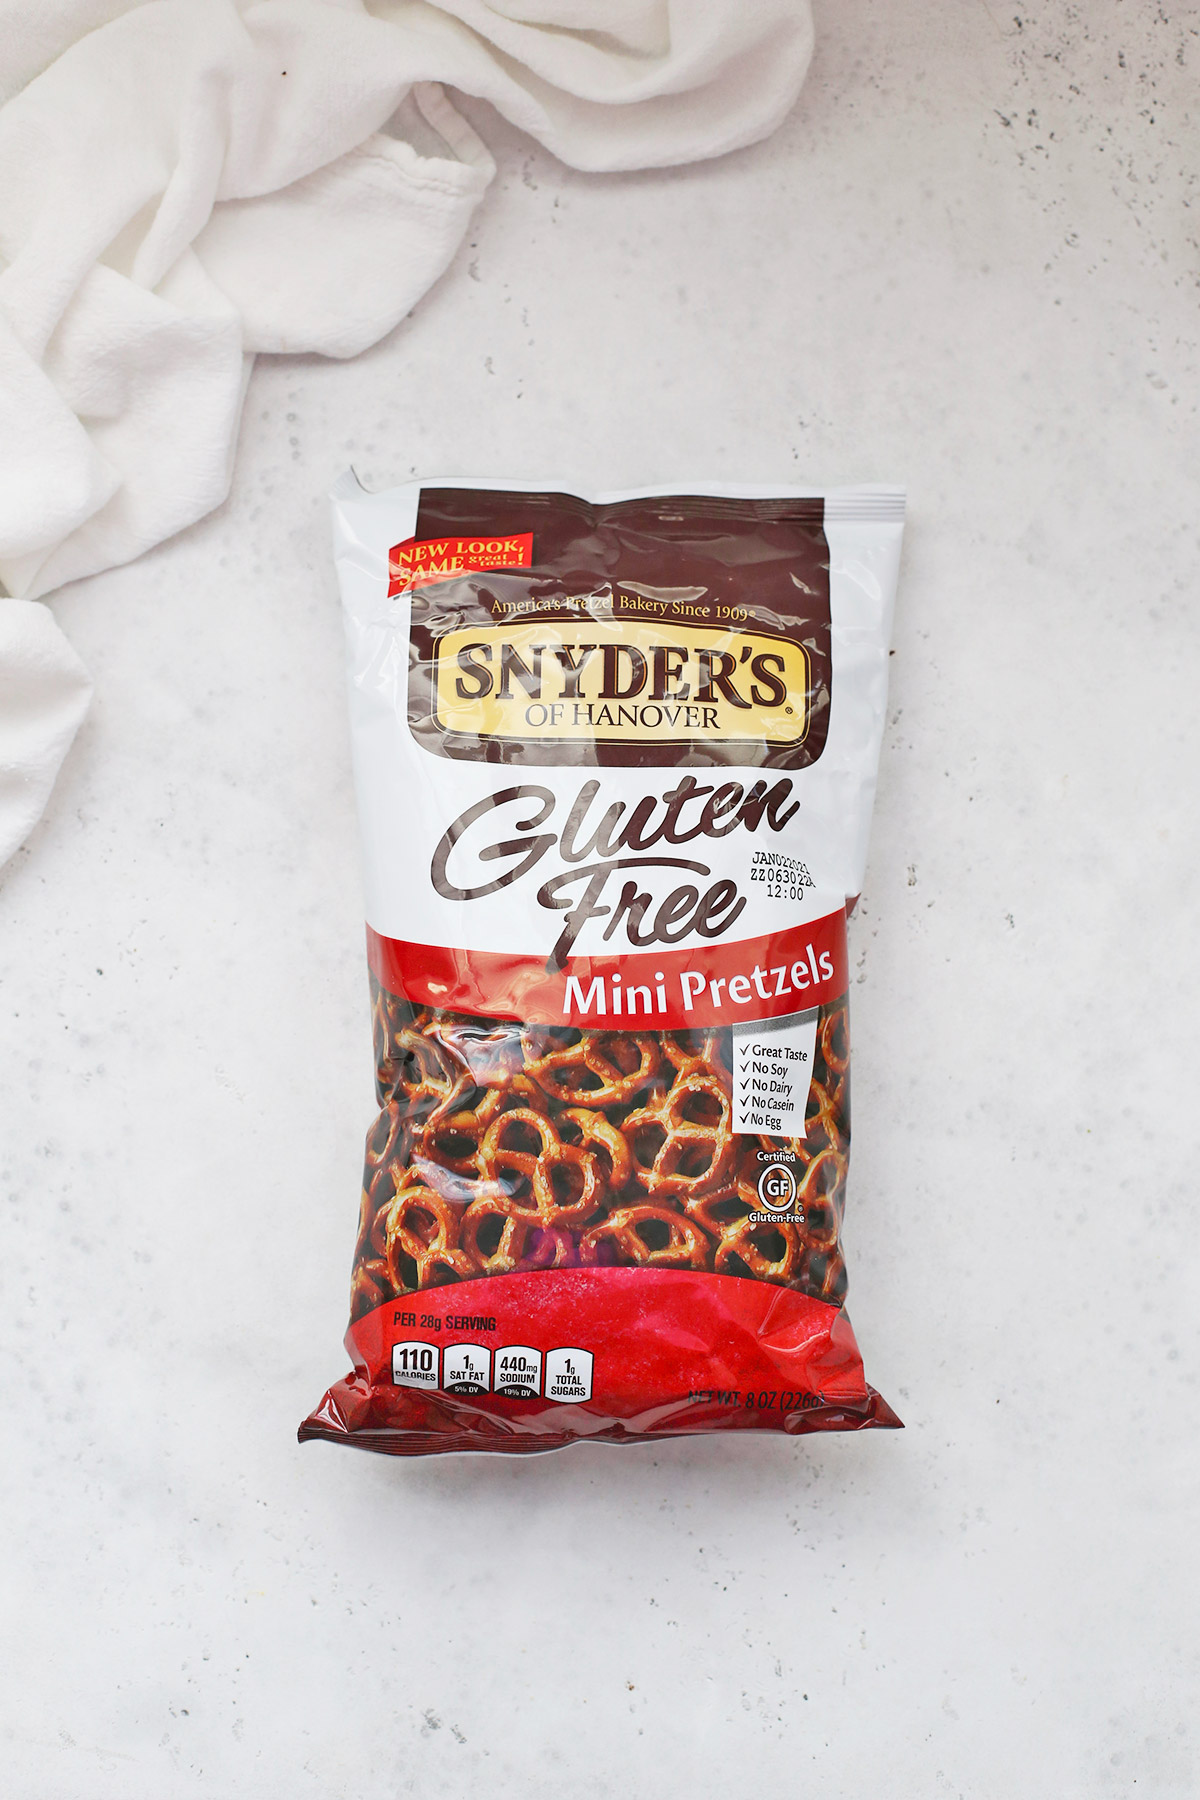 A bag of gluten-free Snyders pretzels on a white background